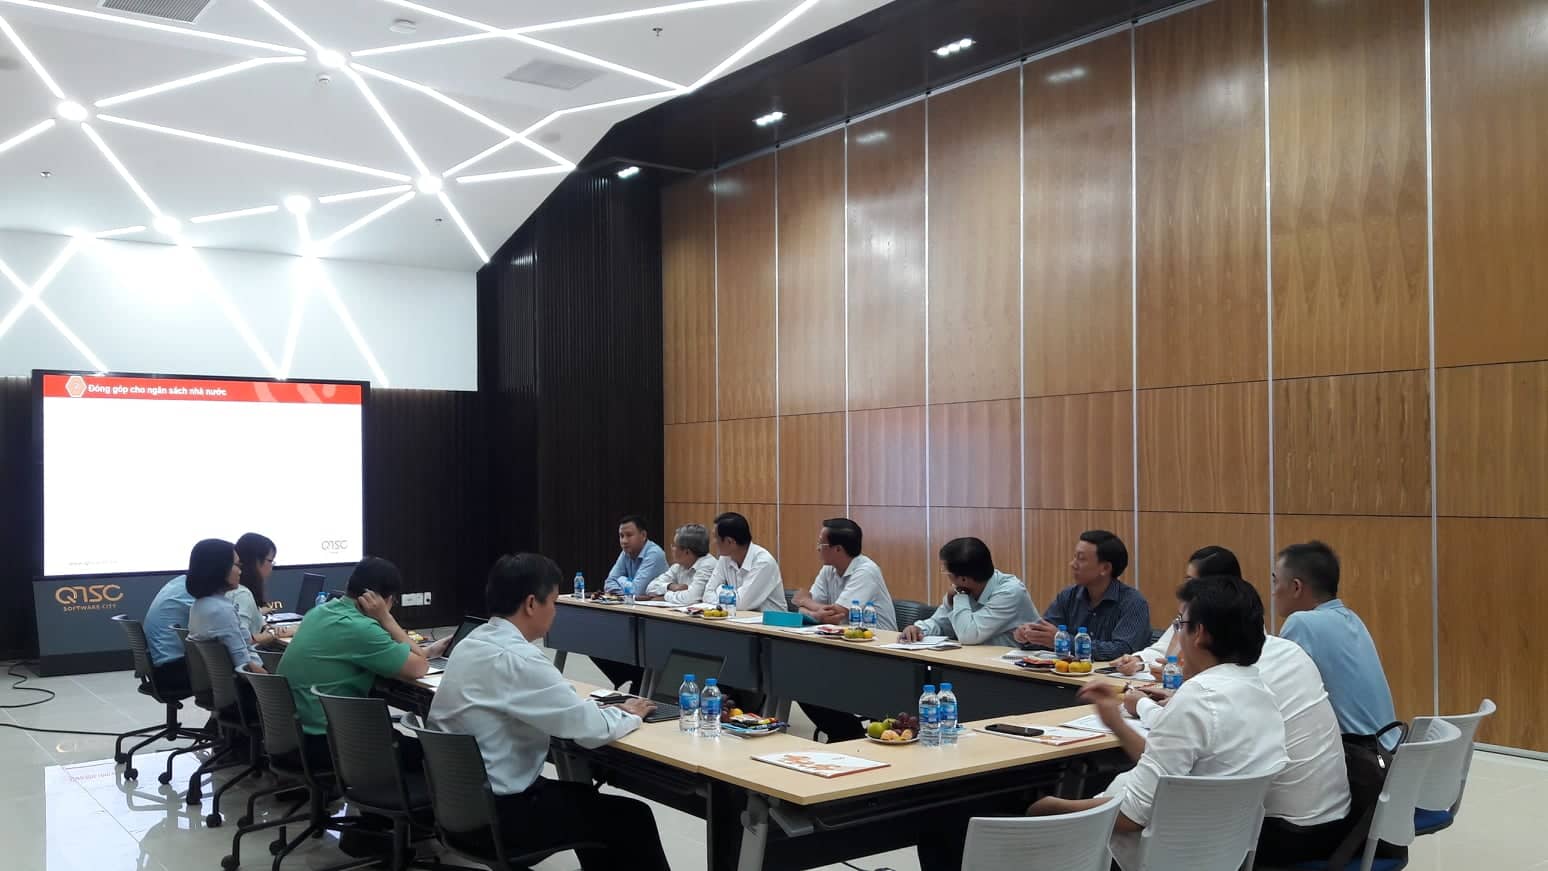 Delegation of Ben Tre province met with QTSC